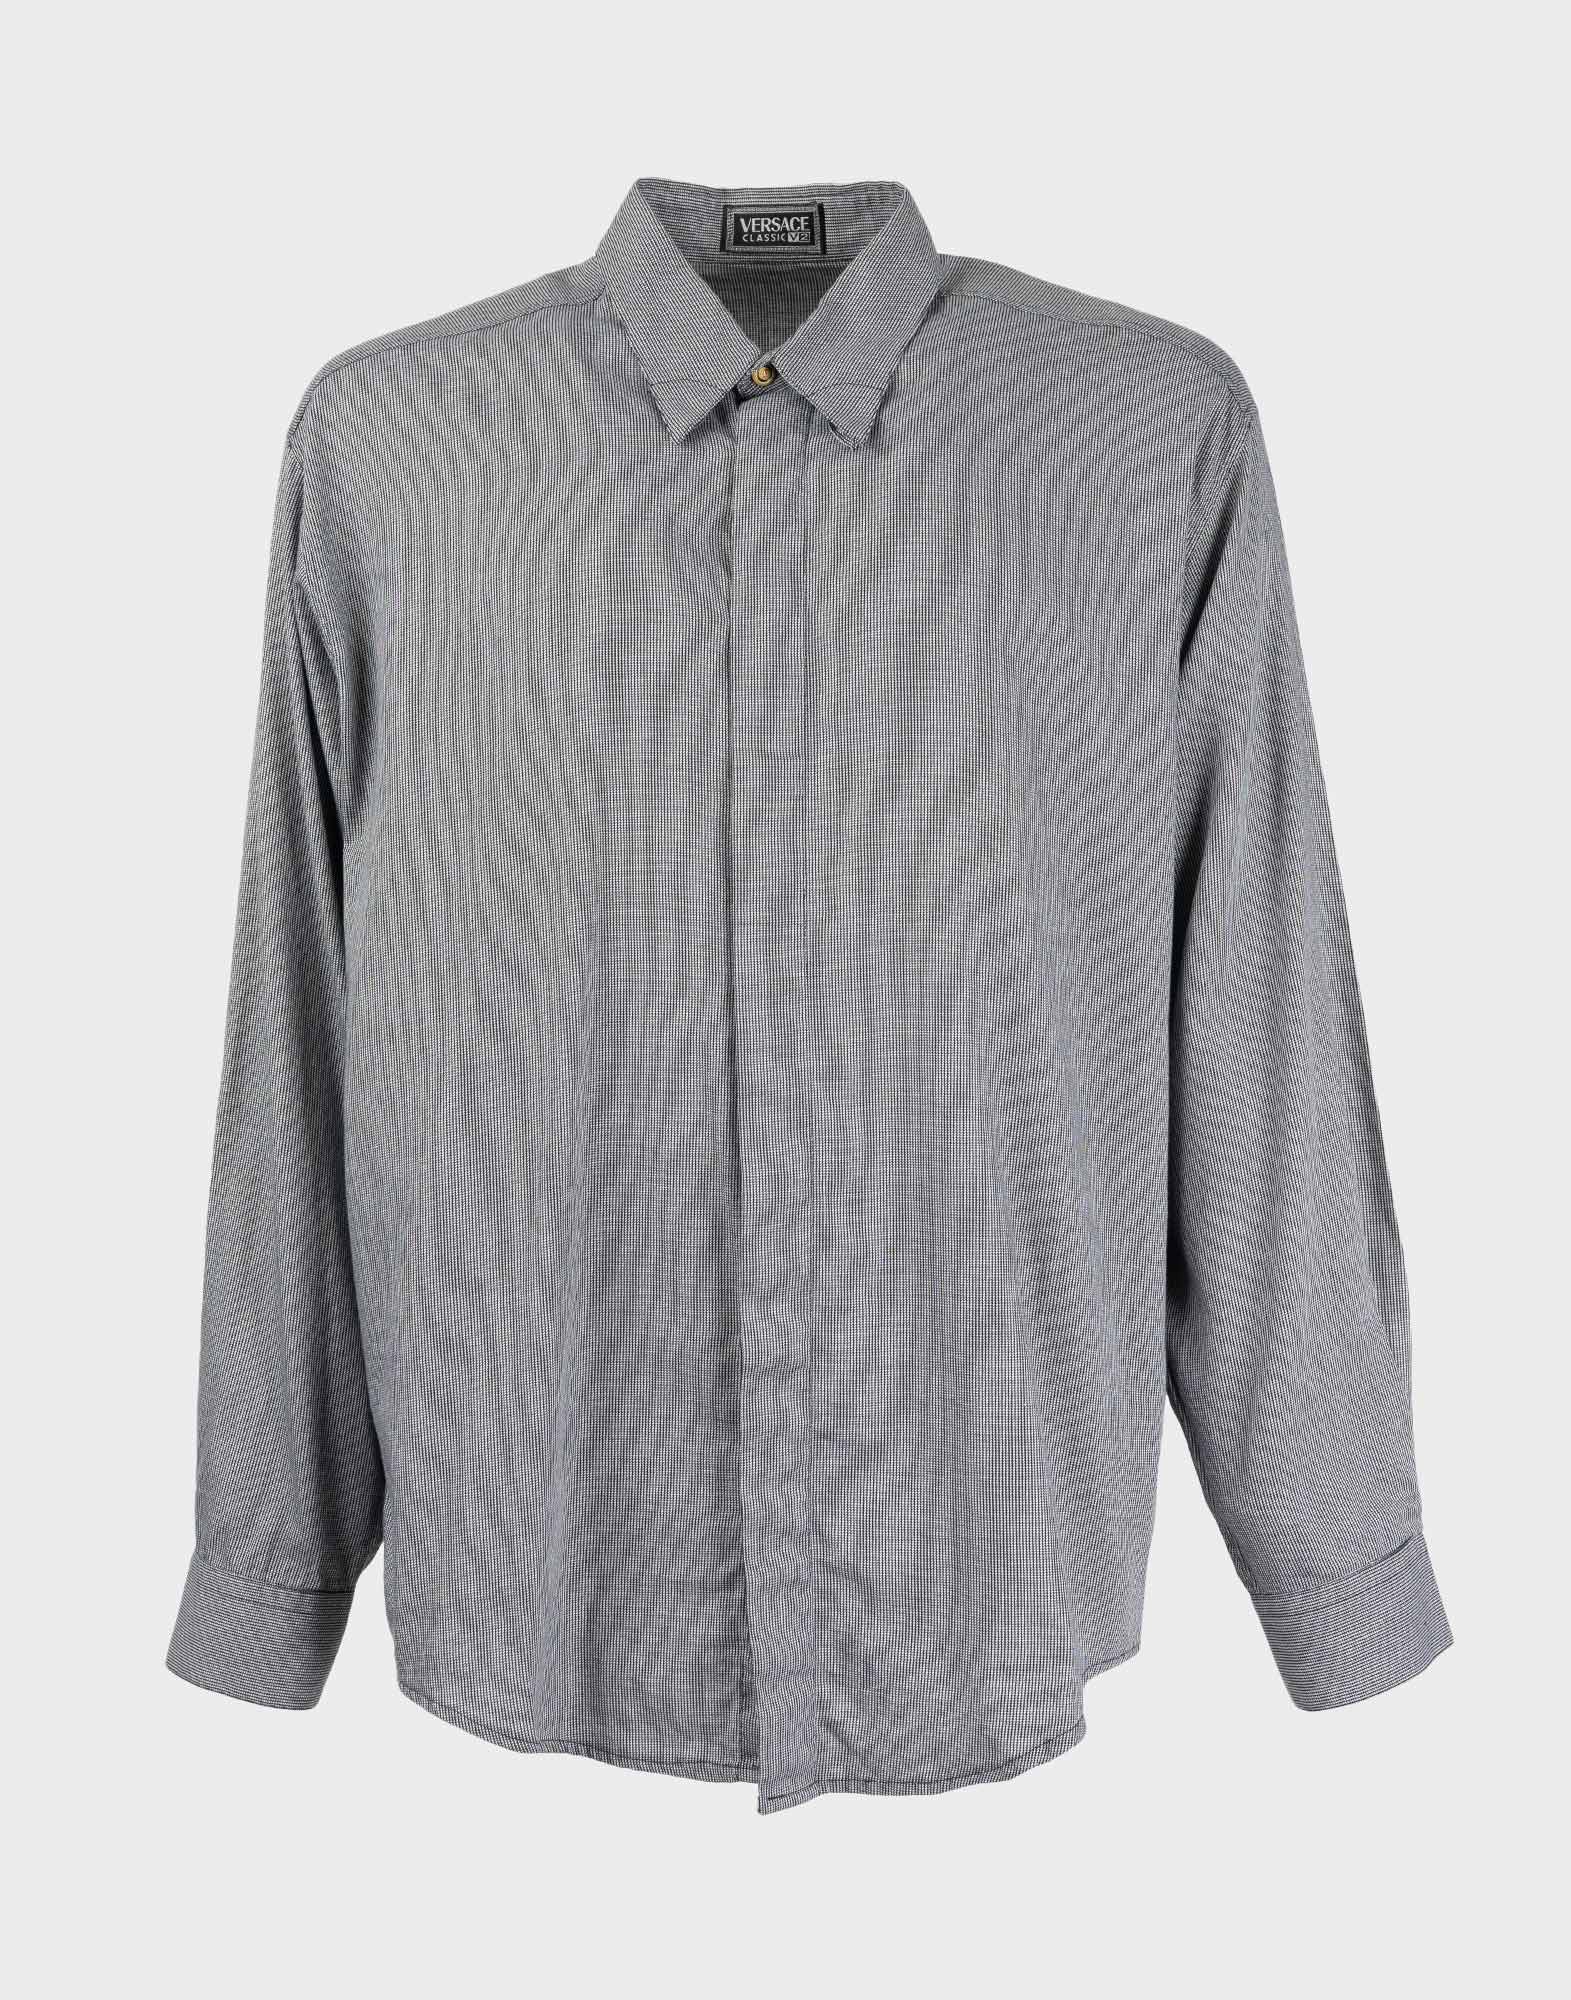 grey cotton men's shirt with striped pattern, long sleeves, front fastening with concealed buttons